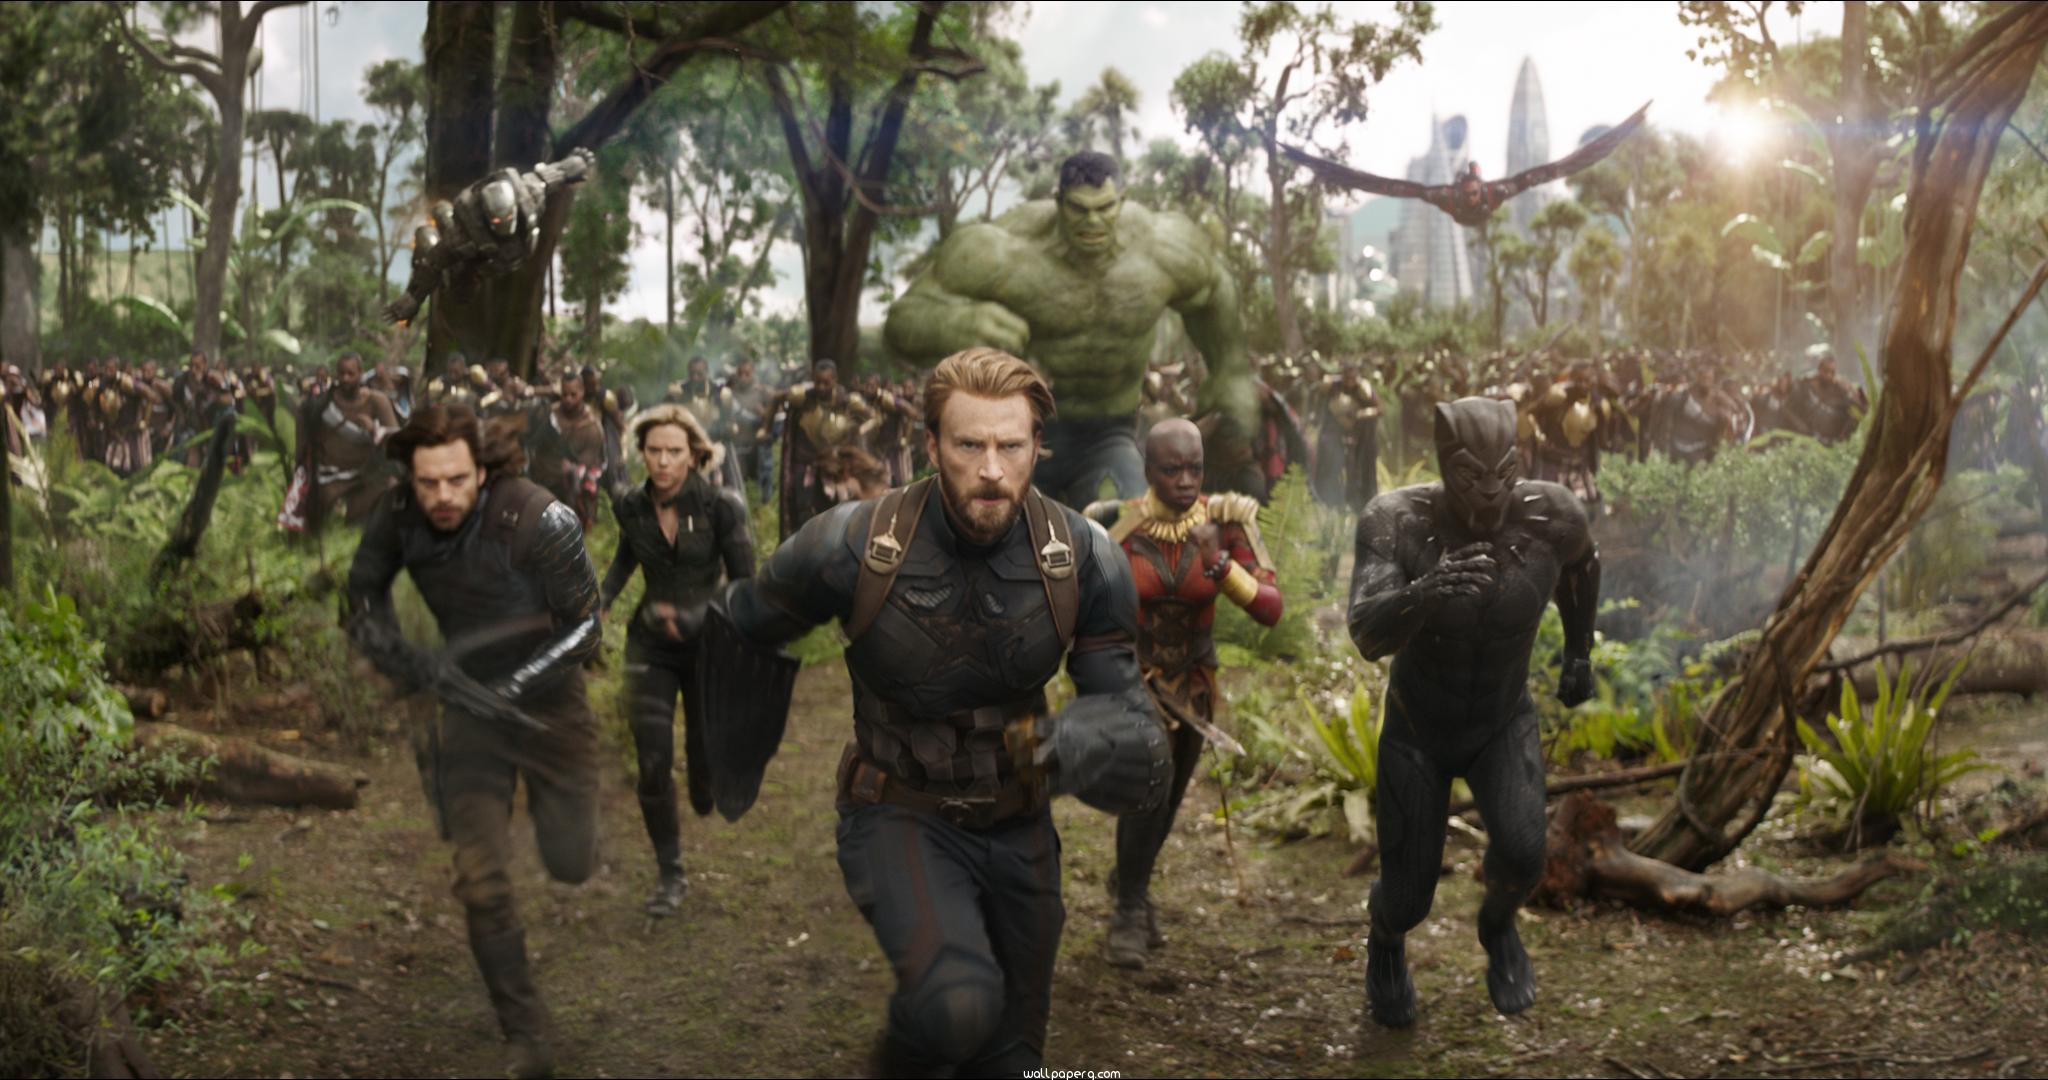 Download Avengers infinity war scene HD movie wallpaper for your mobile cell phone